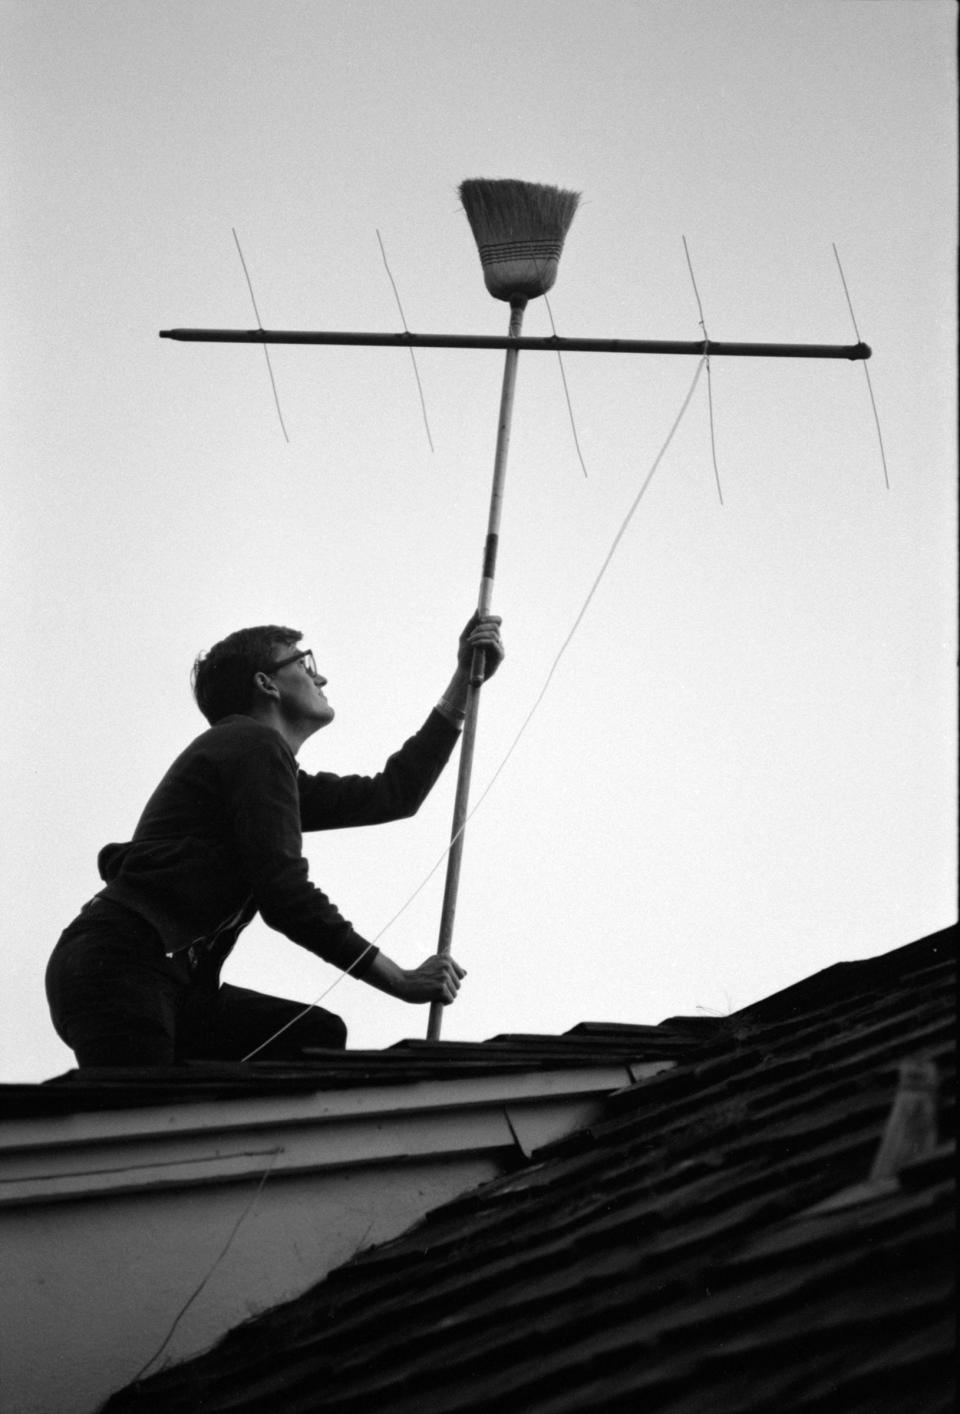 A football fan uses a broom on the roof of his house to try to improve reception in Los Angeles. The league's governing body required the game to blacked out in the local market, so residents attempted to access the broadcast from other cities.<span class="copyright">Bill Ray—The LIFE Picture Collection/Shutterstock</span>